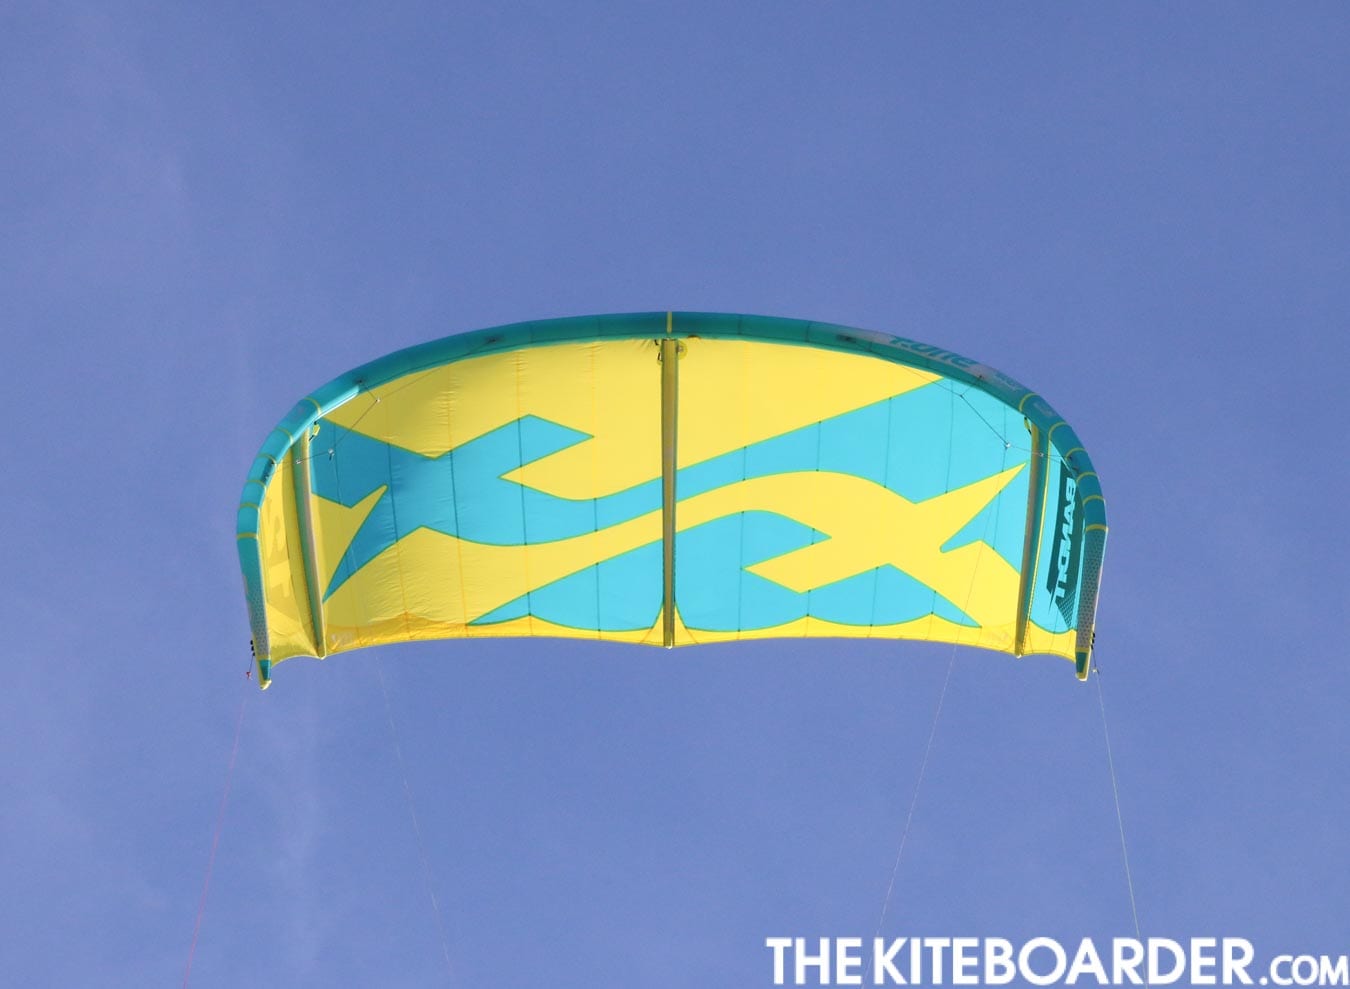 Tkb Review: 2018 F-ONE Bandit - The Kiteboarder Magazine